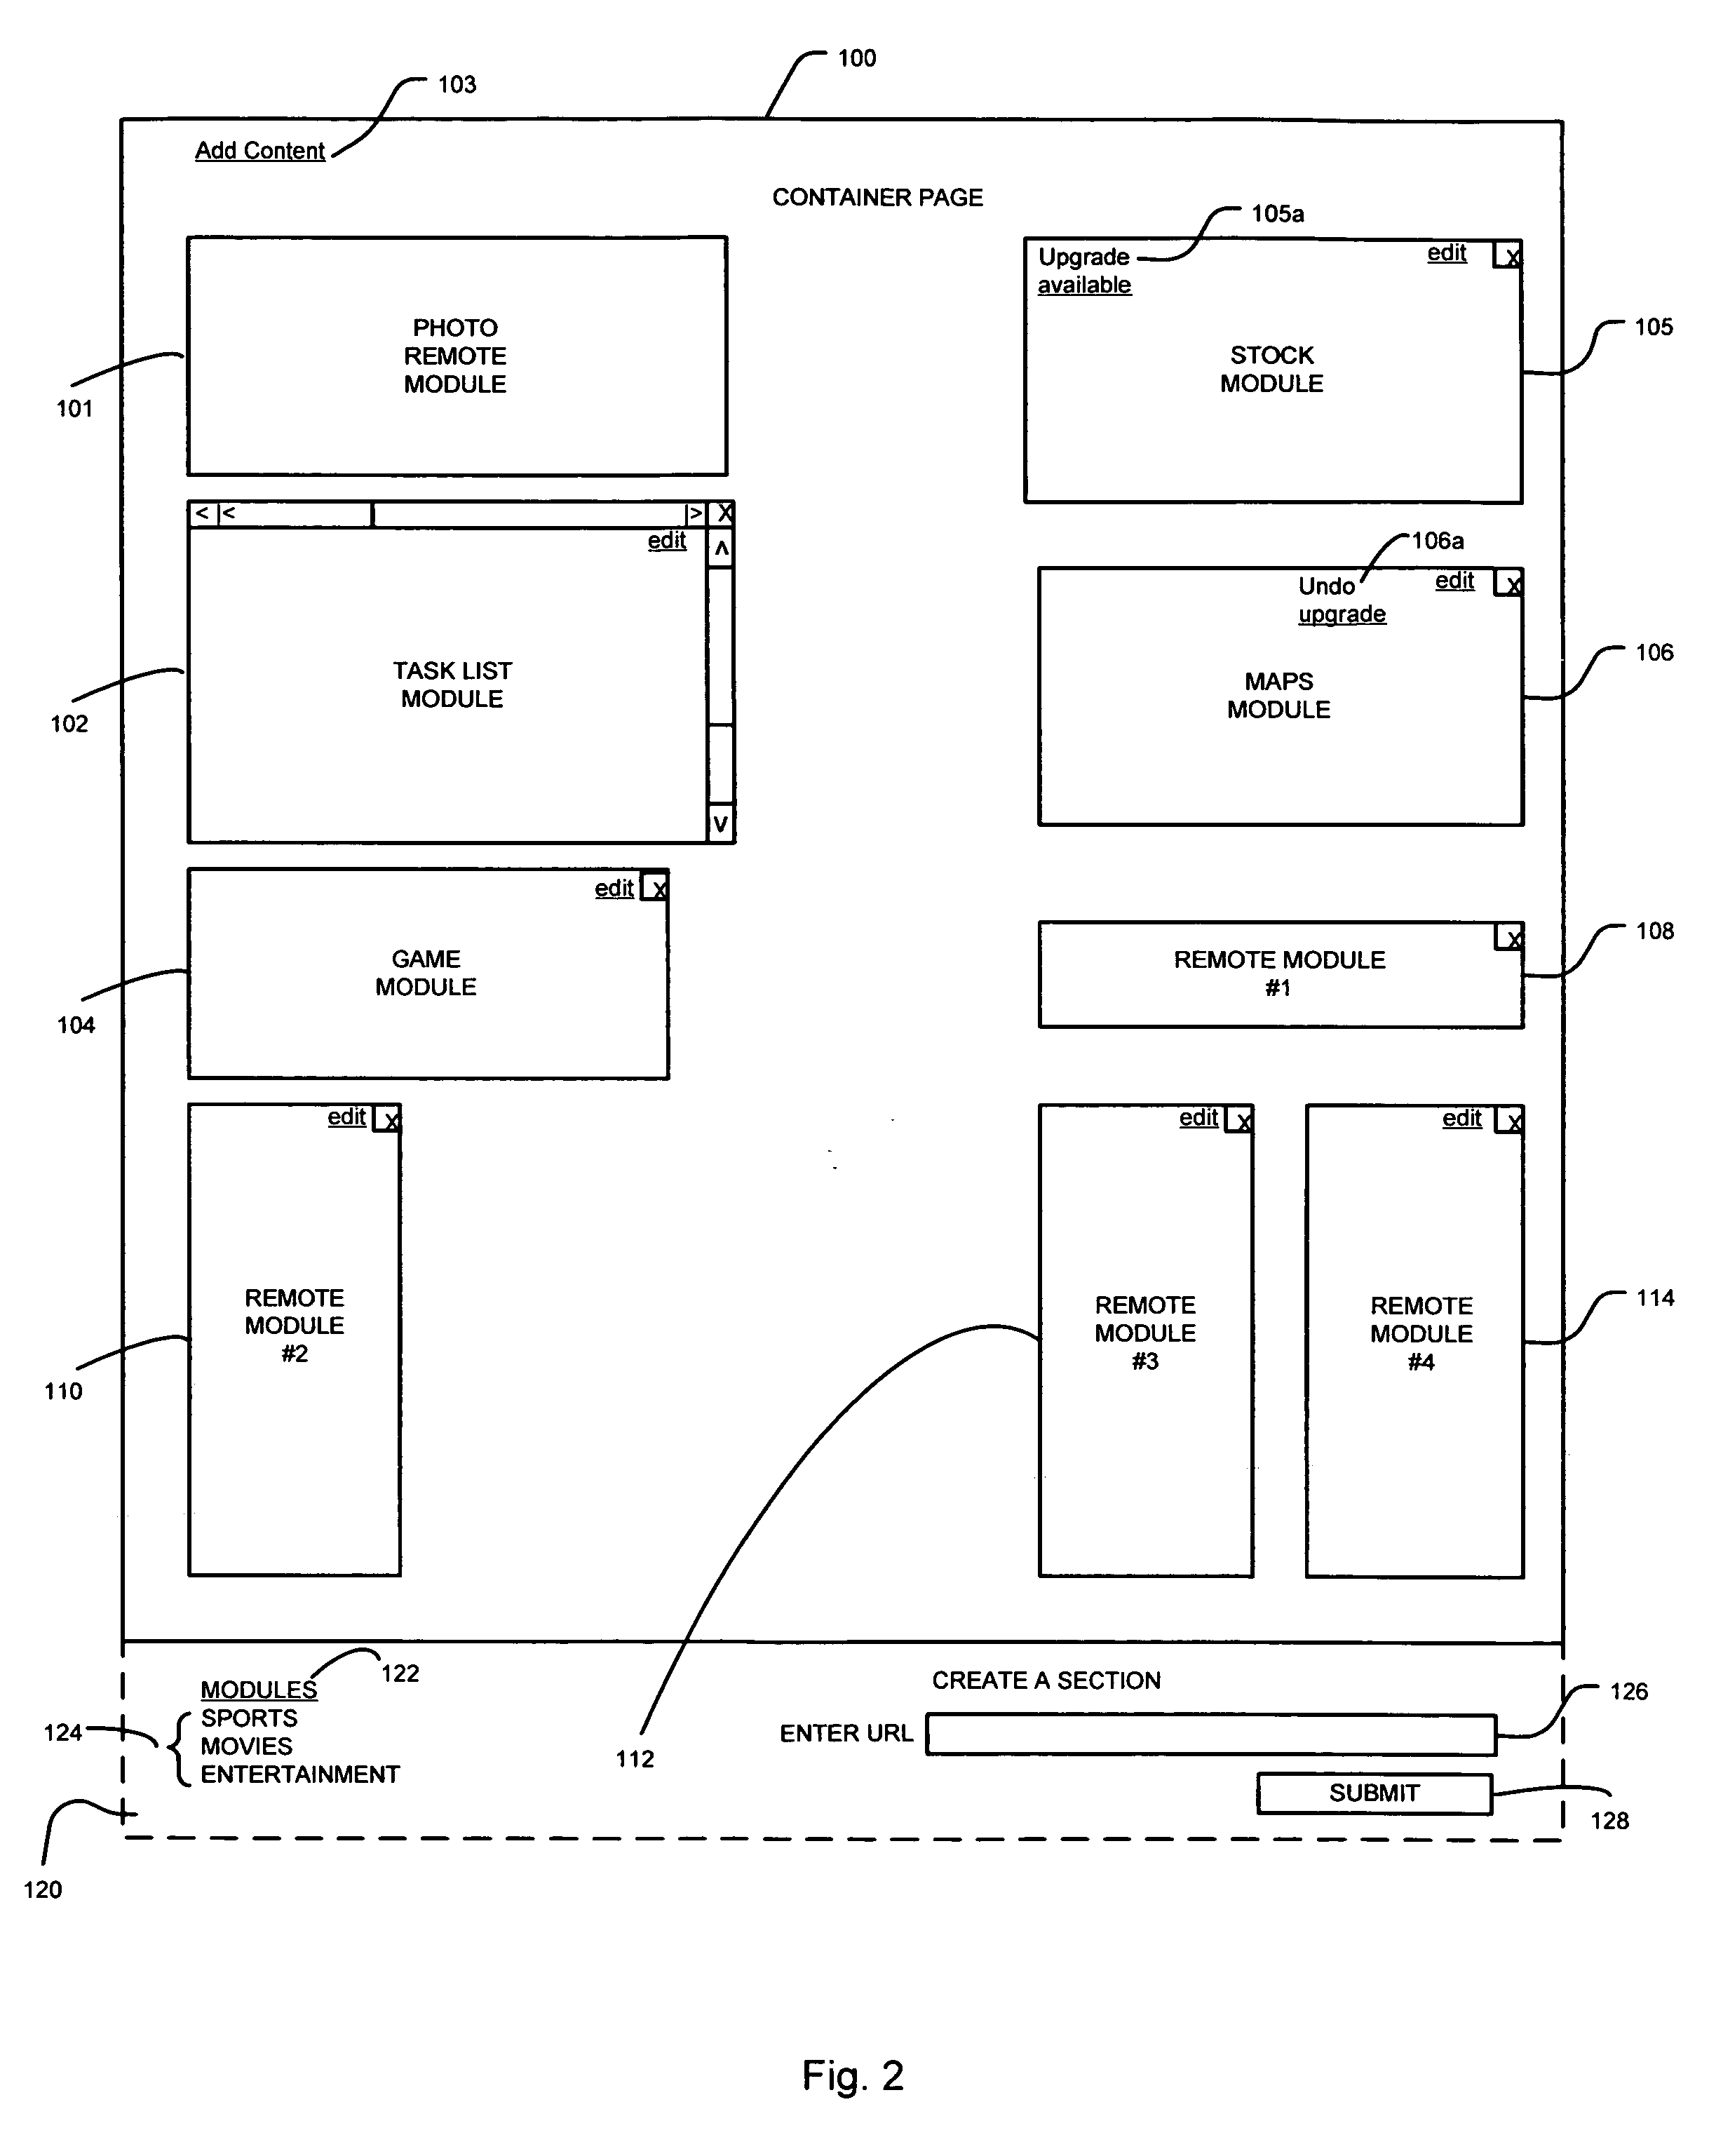 Module specification for a module to be incorporated into a container document